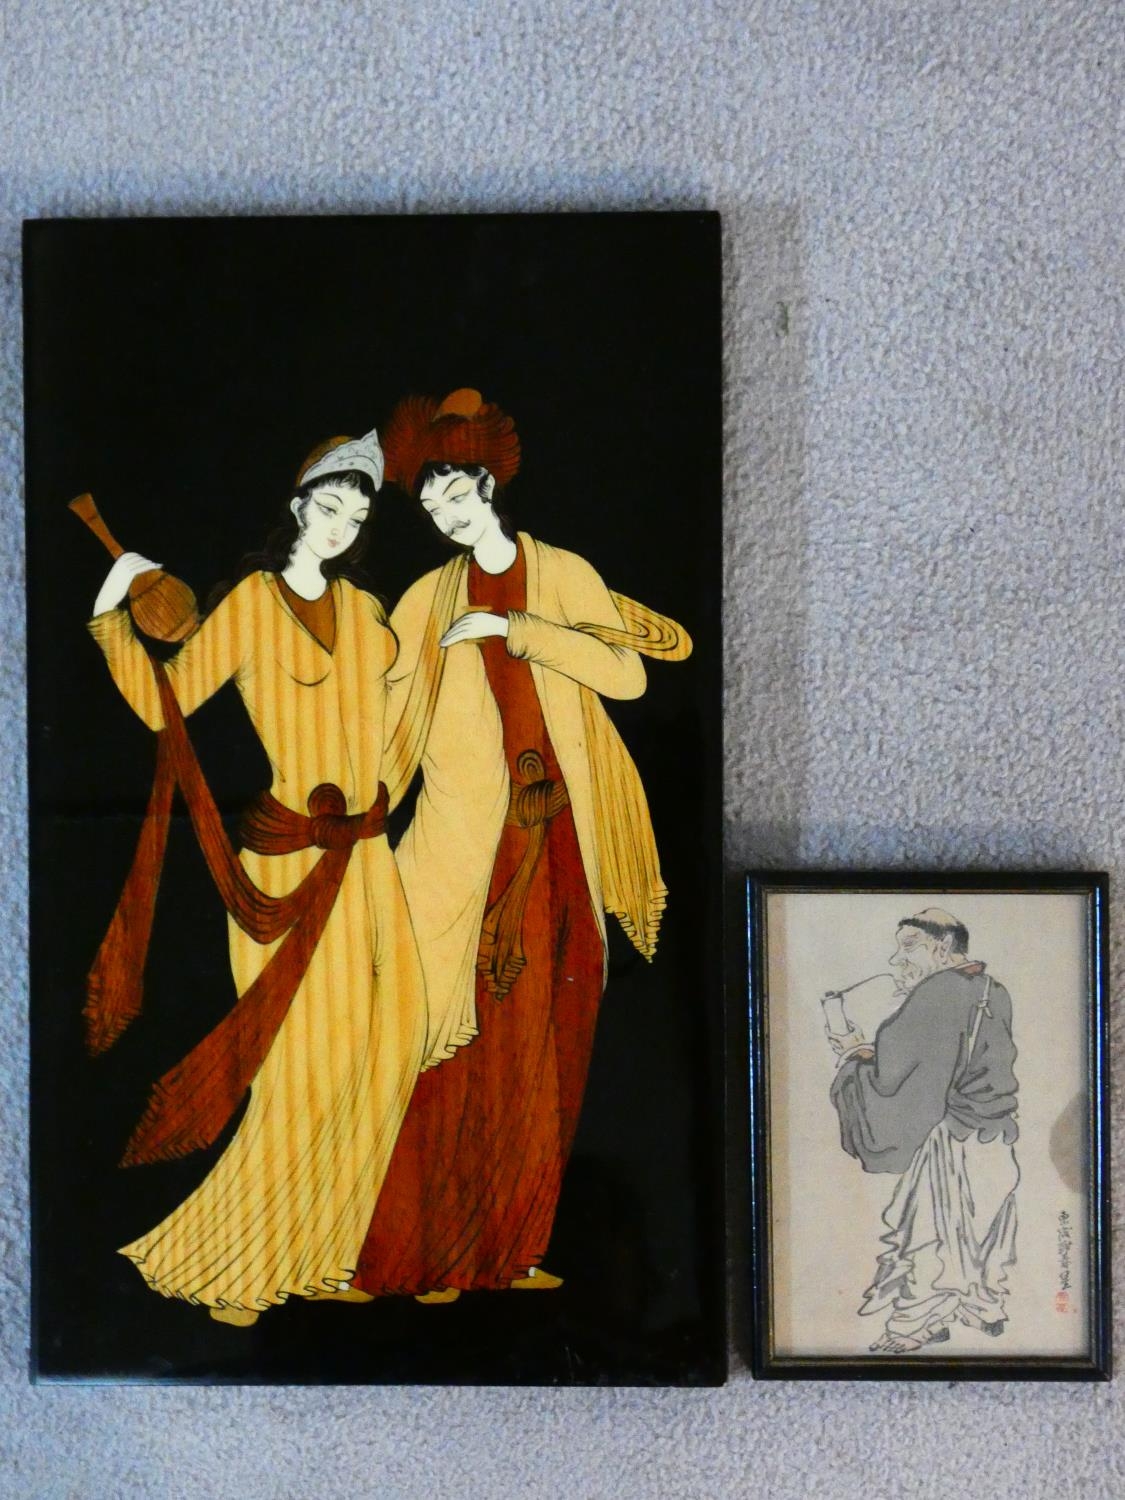 A Indian wooden and bone inlaid picture of a young couple in traditional dress along with a framed